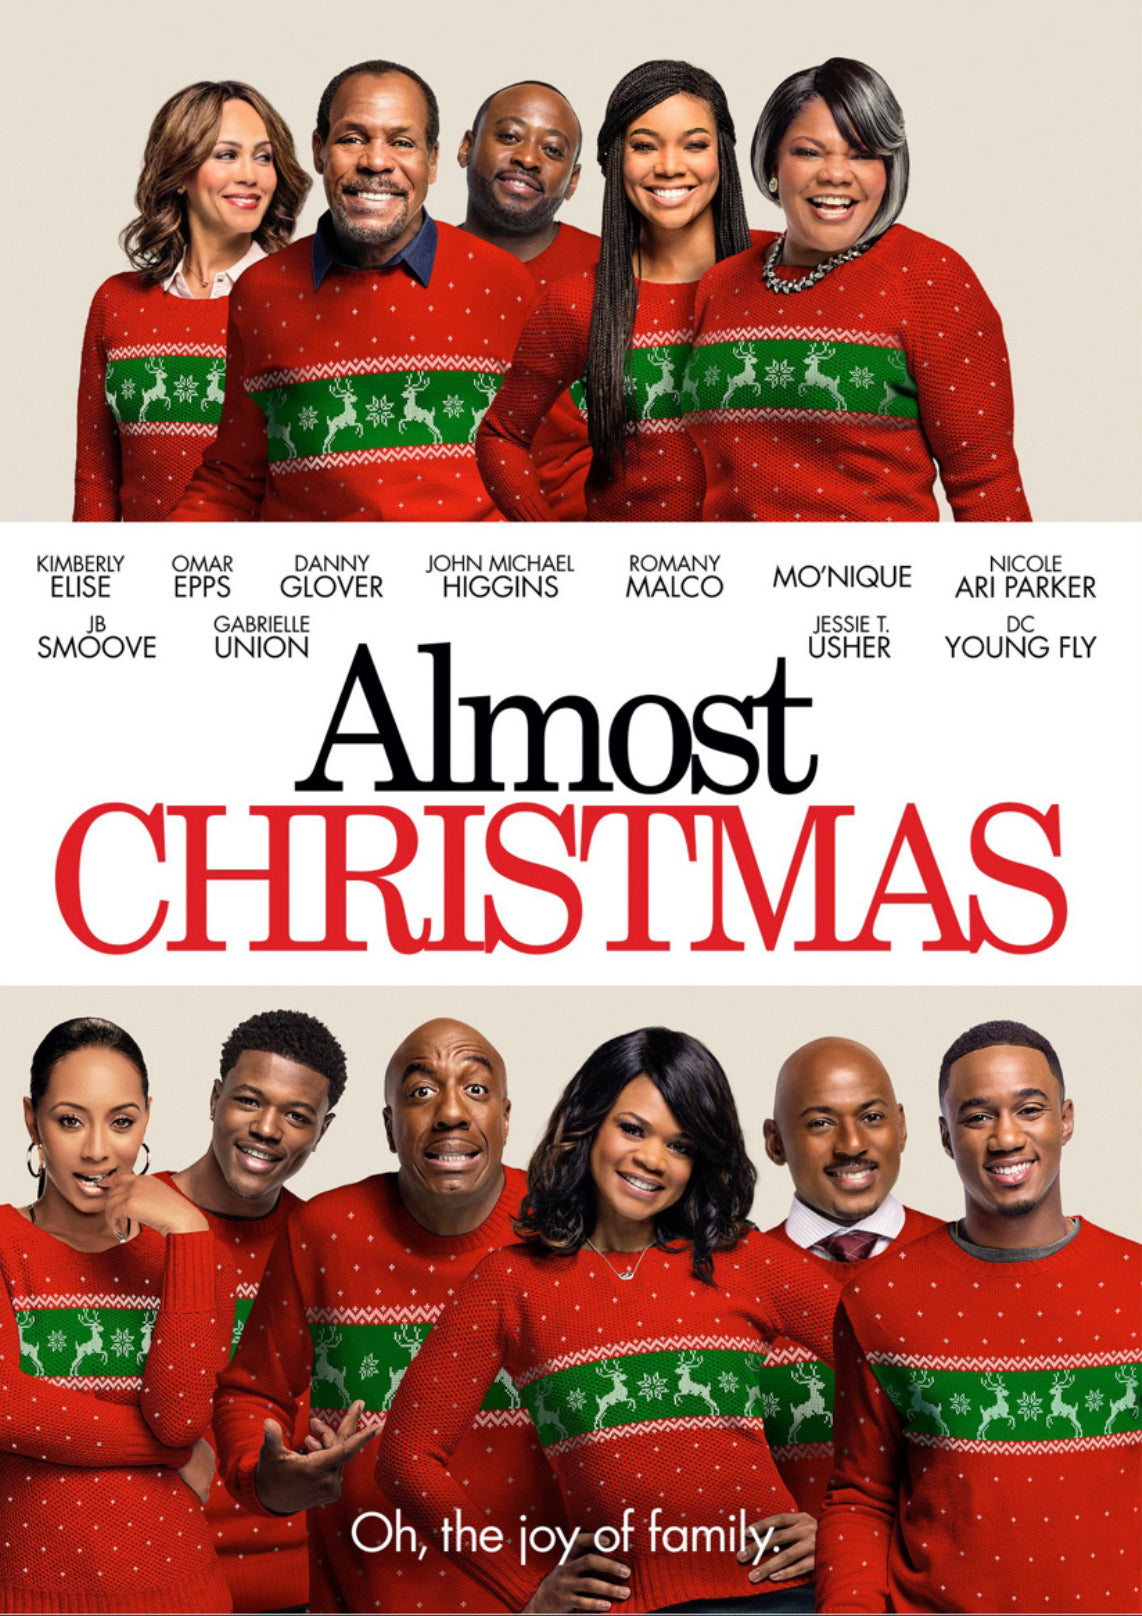 Almost Christmas (2016: Ports Via MA) iTunes HD redemption only